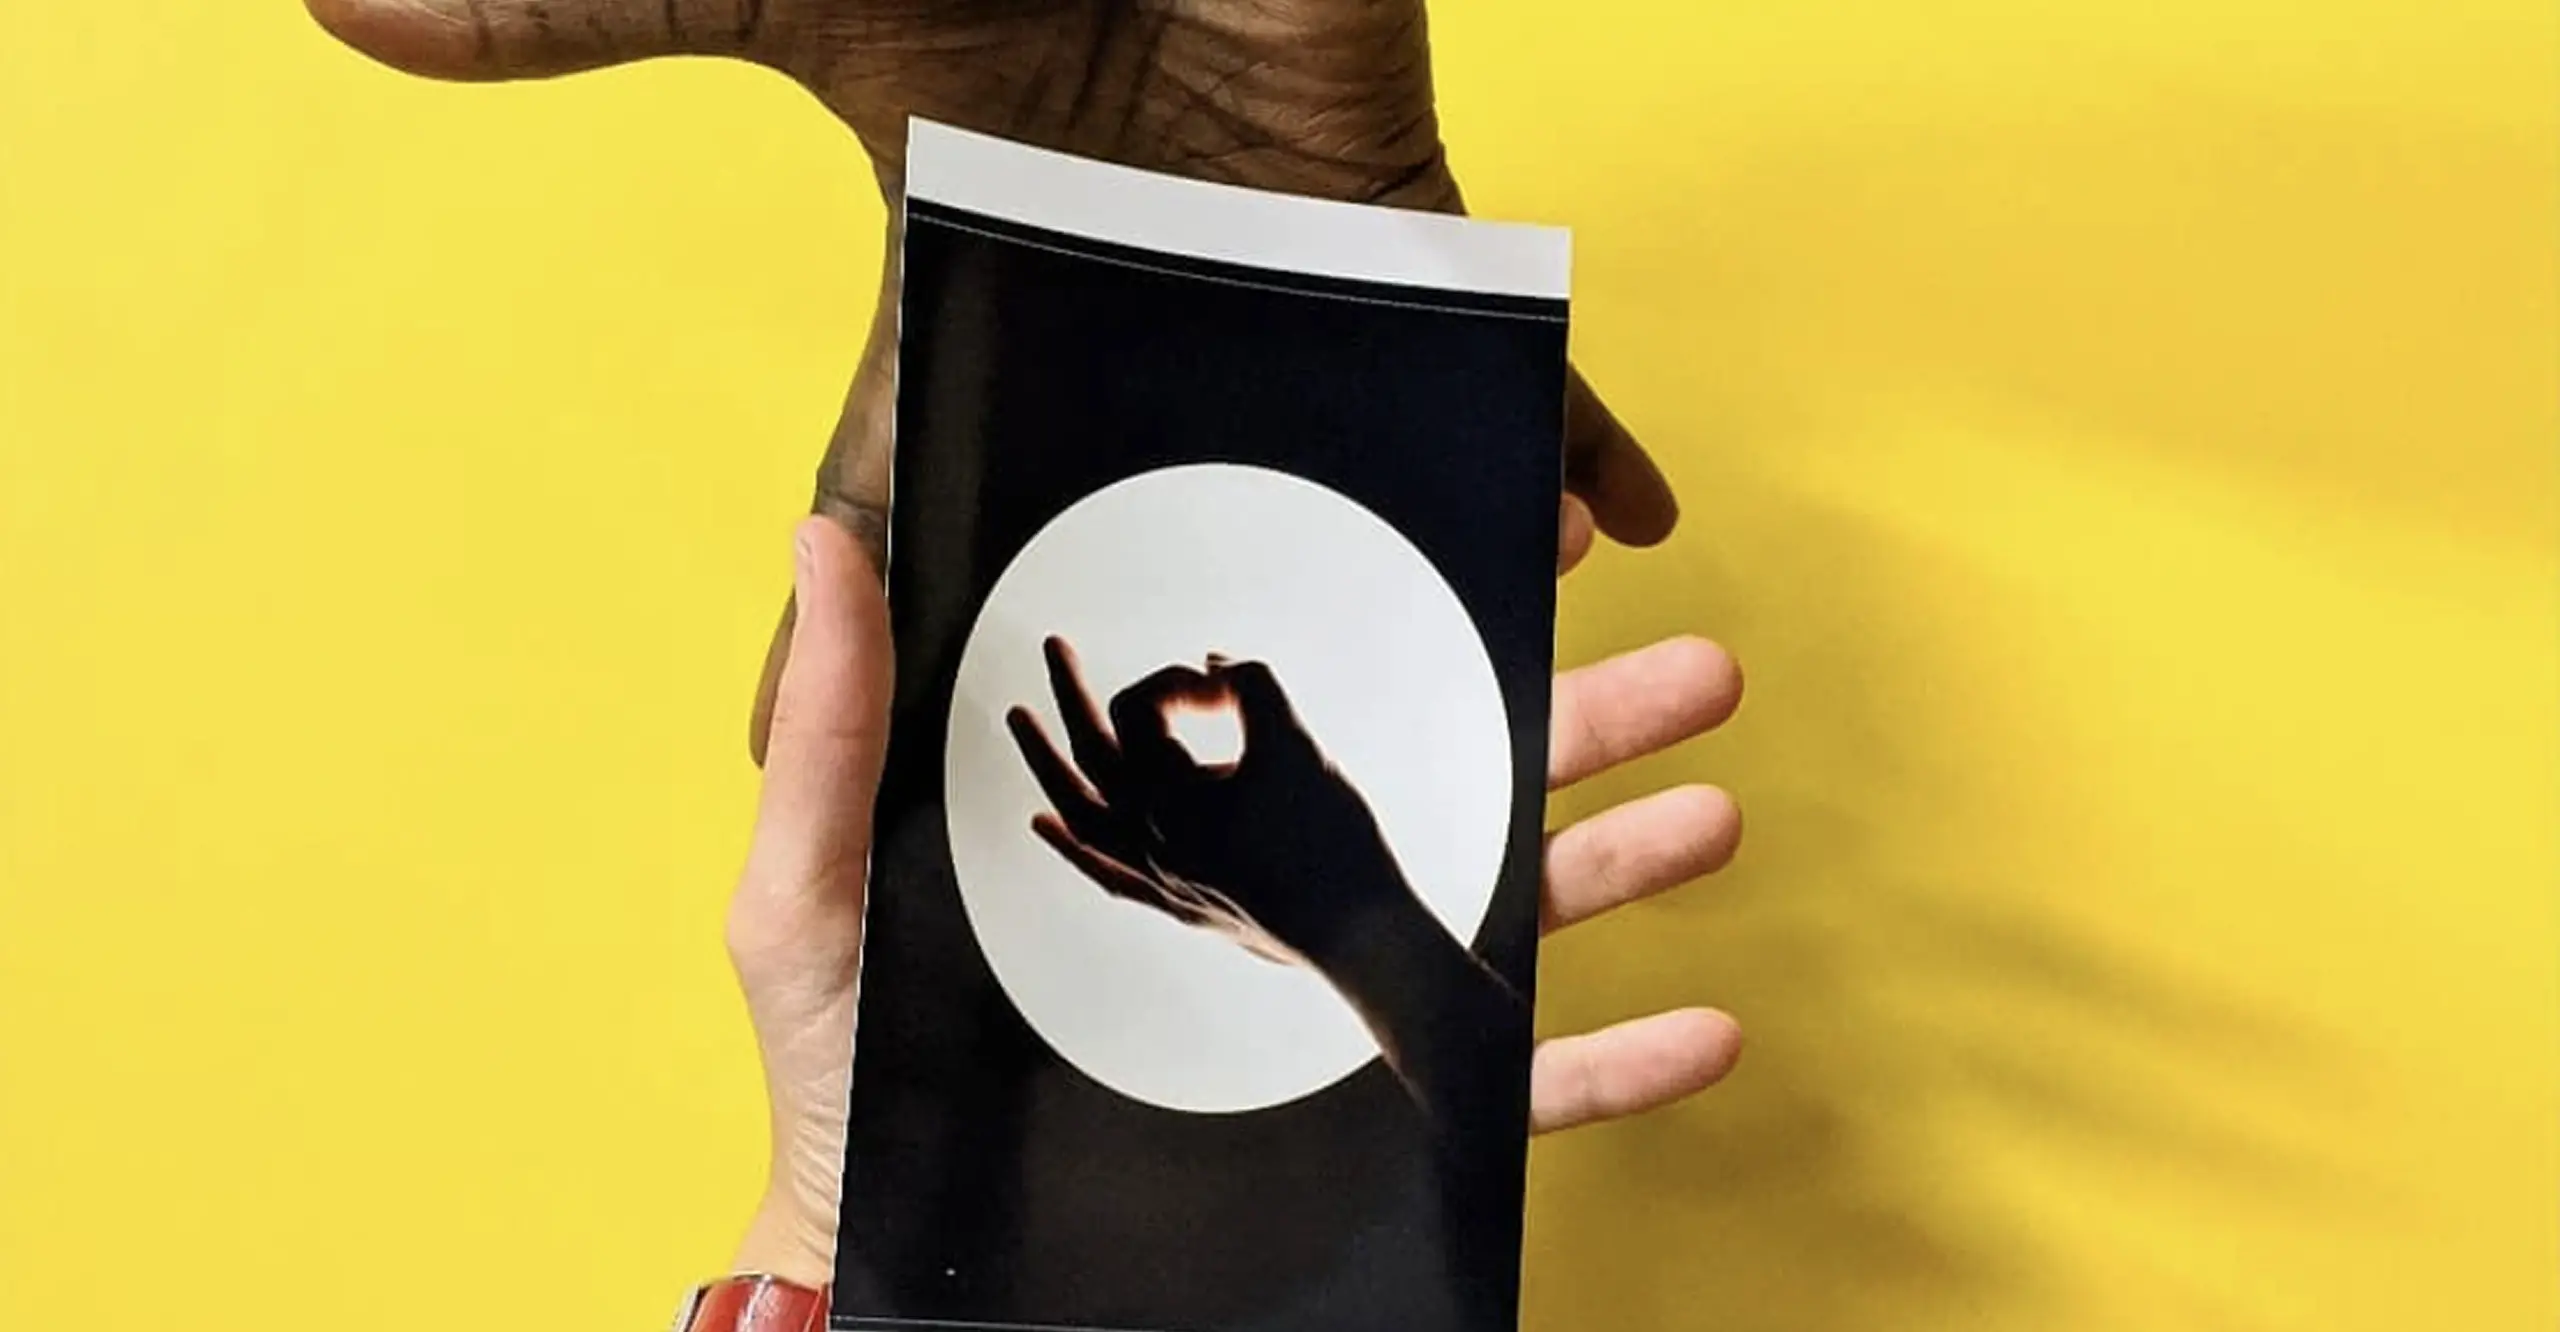 A photograph of 2 hands holding a printed photograph with a yellow background behind